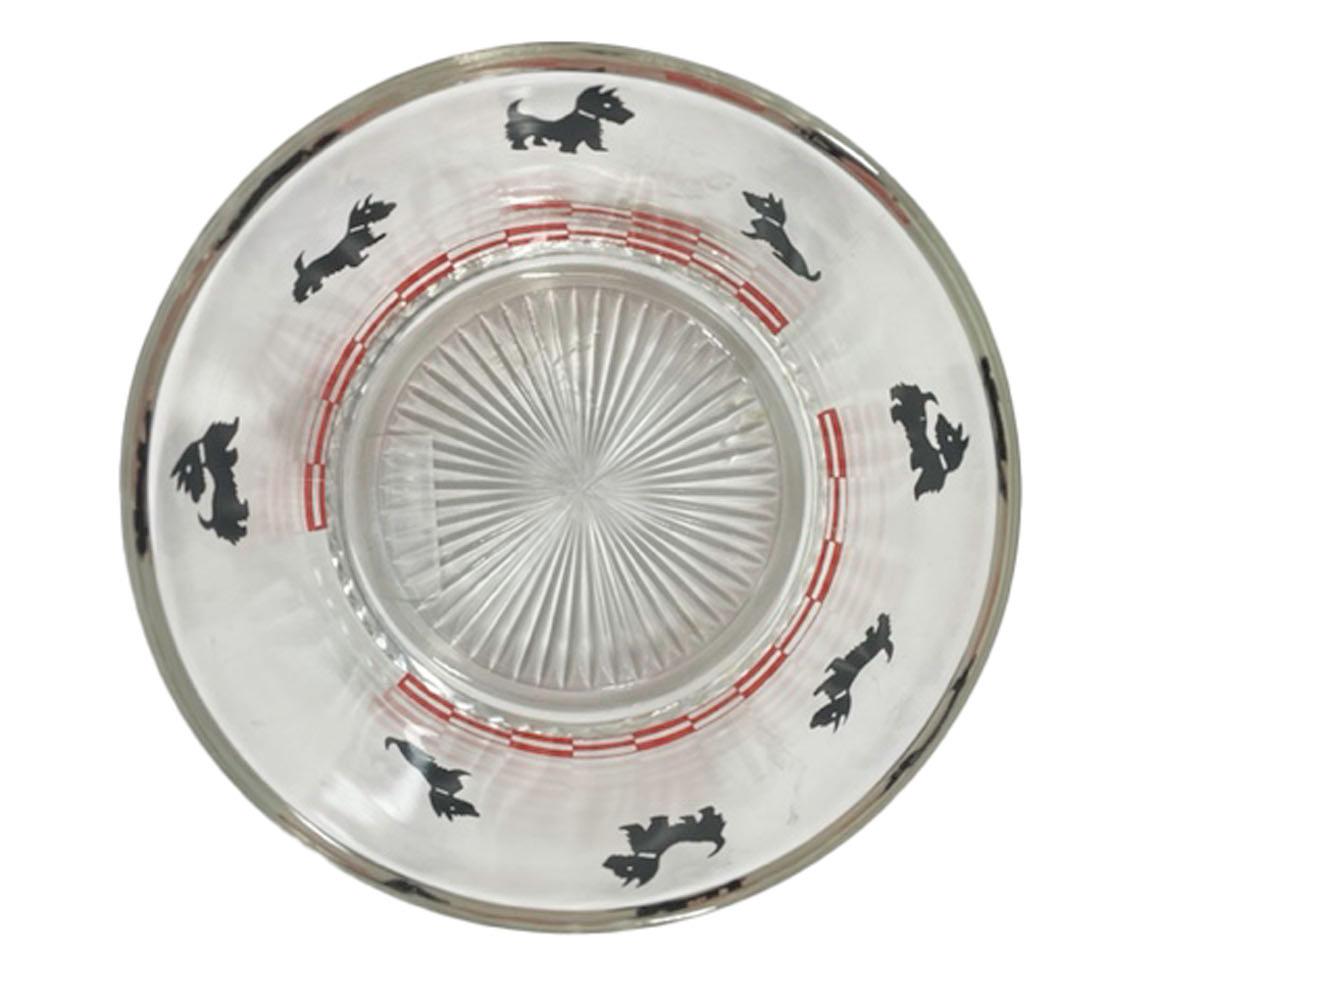 American Art Deco Hazel-Atlas Ice Bowl with Black Scottish Terriers over Red Check Band For Sale